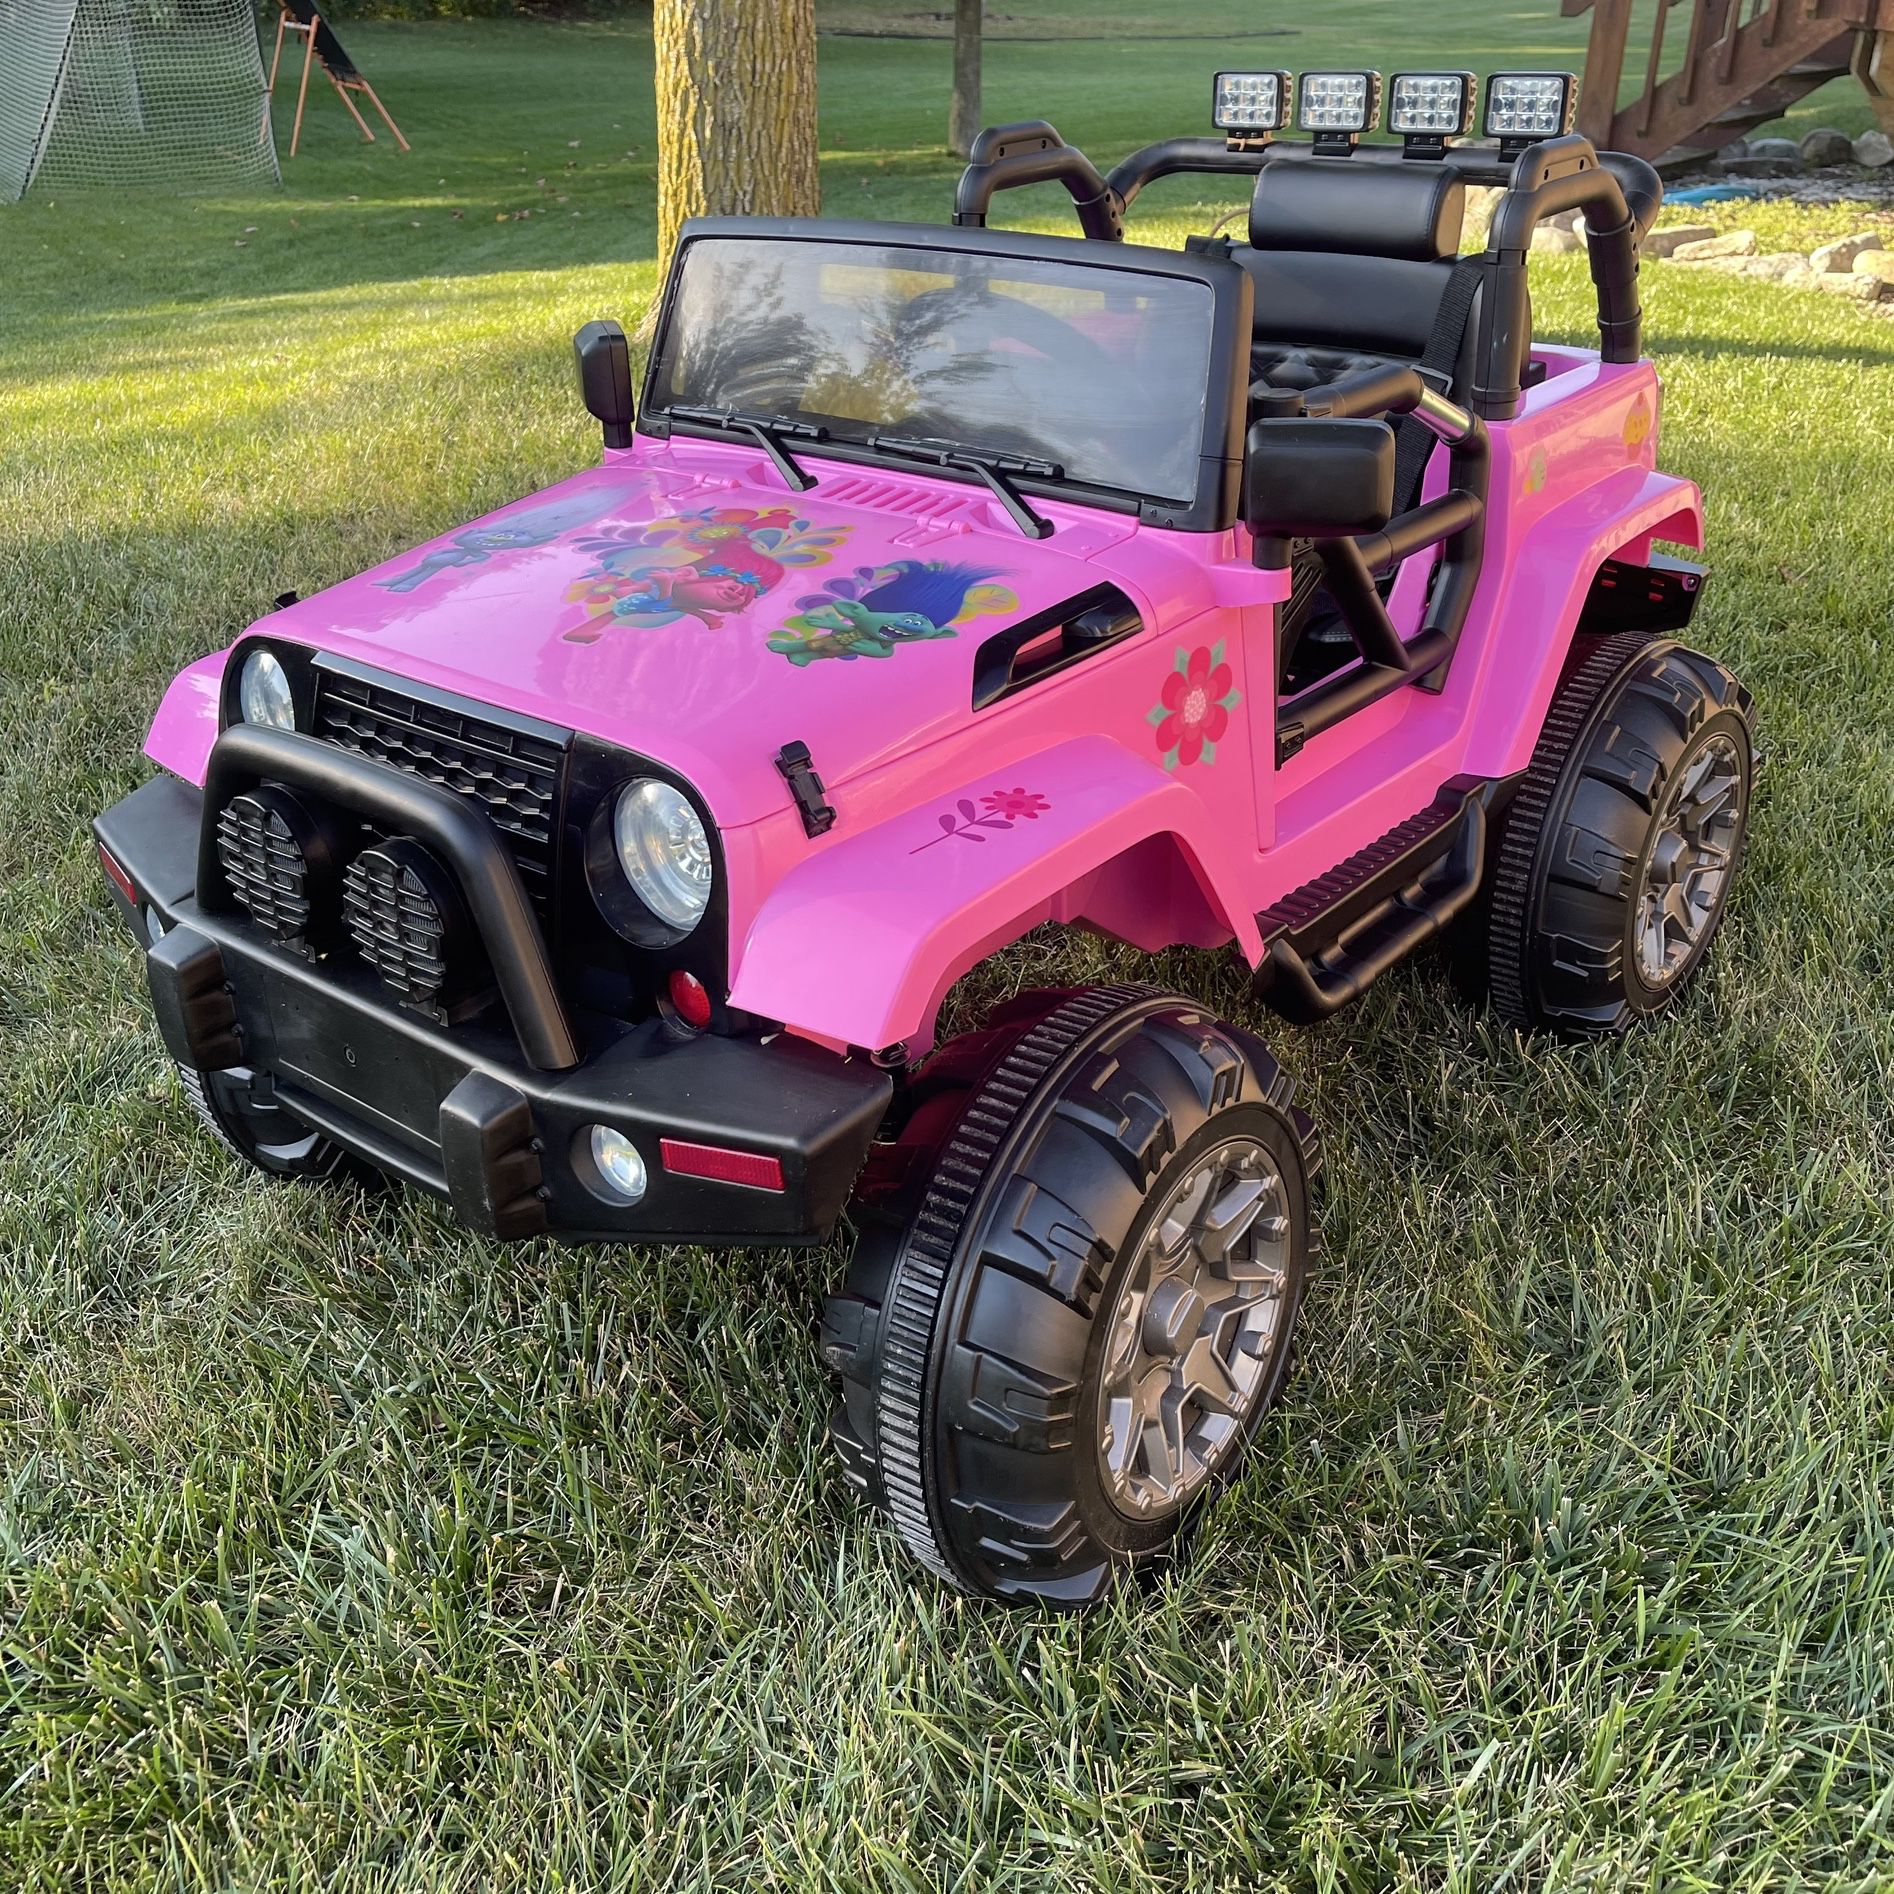 12V KIDS RIDE ON PINK PRINCESS POPPY TROLLS JEEP WITH PARENT REMOTE CONTROL /MUSIC / LIGHTS / SOUNDS - INCLUDES AFTERMARKET HIGH QUALITY BATTERY